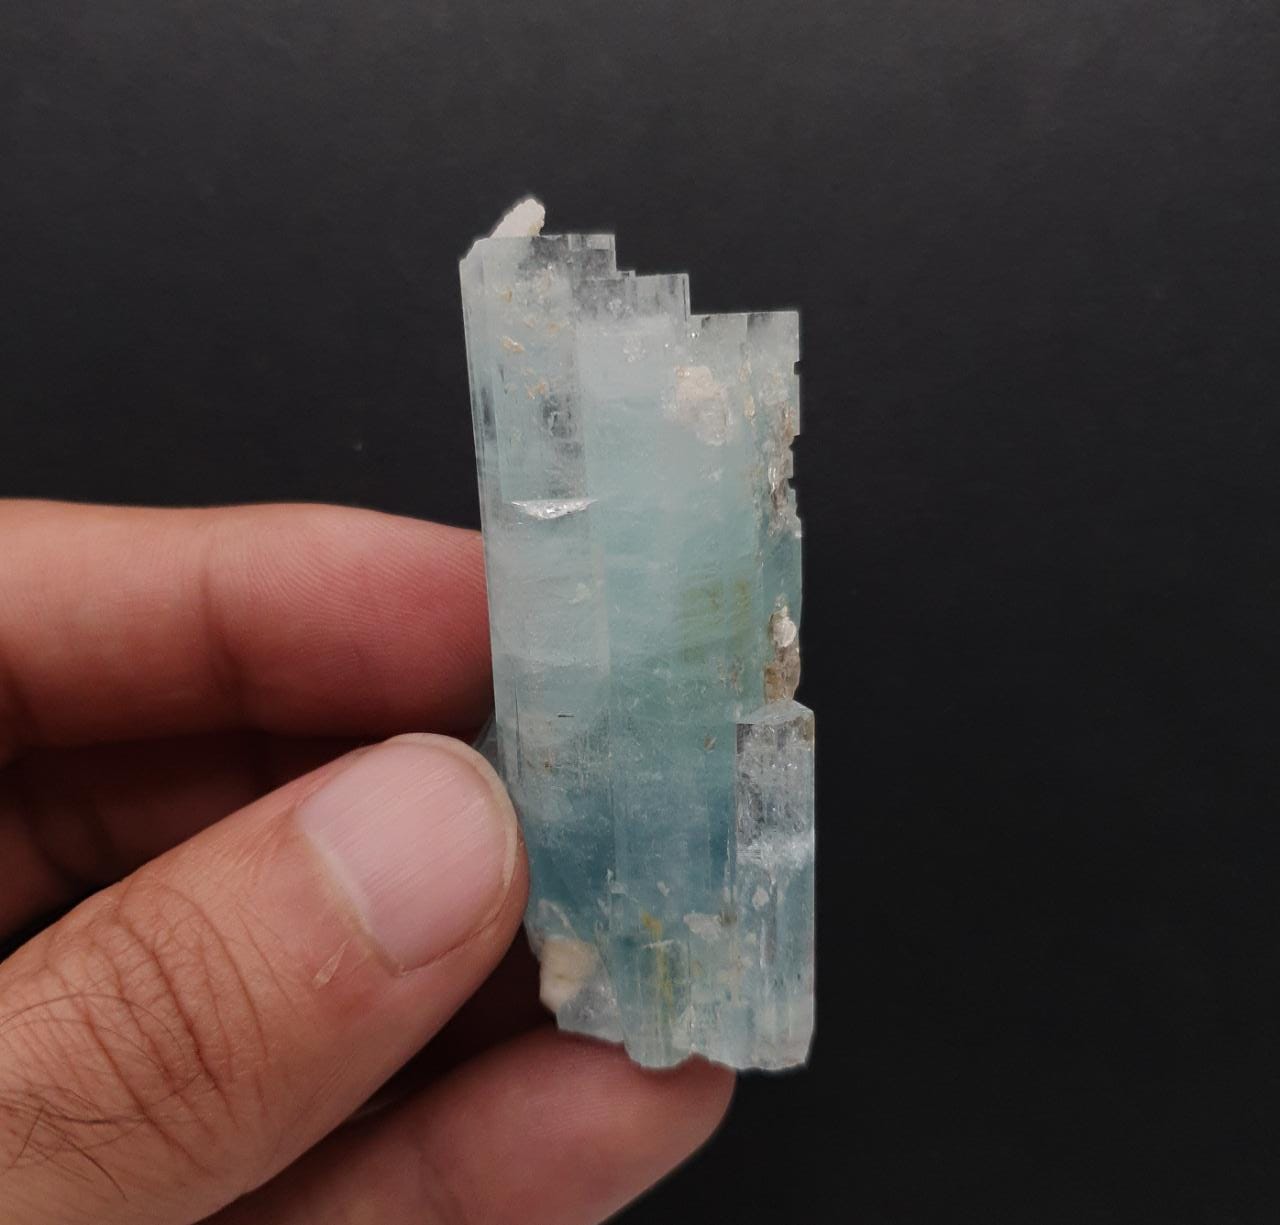 Lovely Sky-Blue Color Aquamarine Aggregate With Muscovite